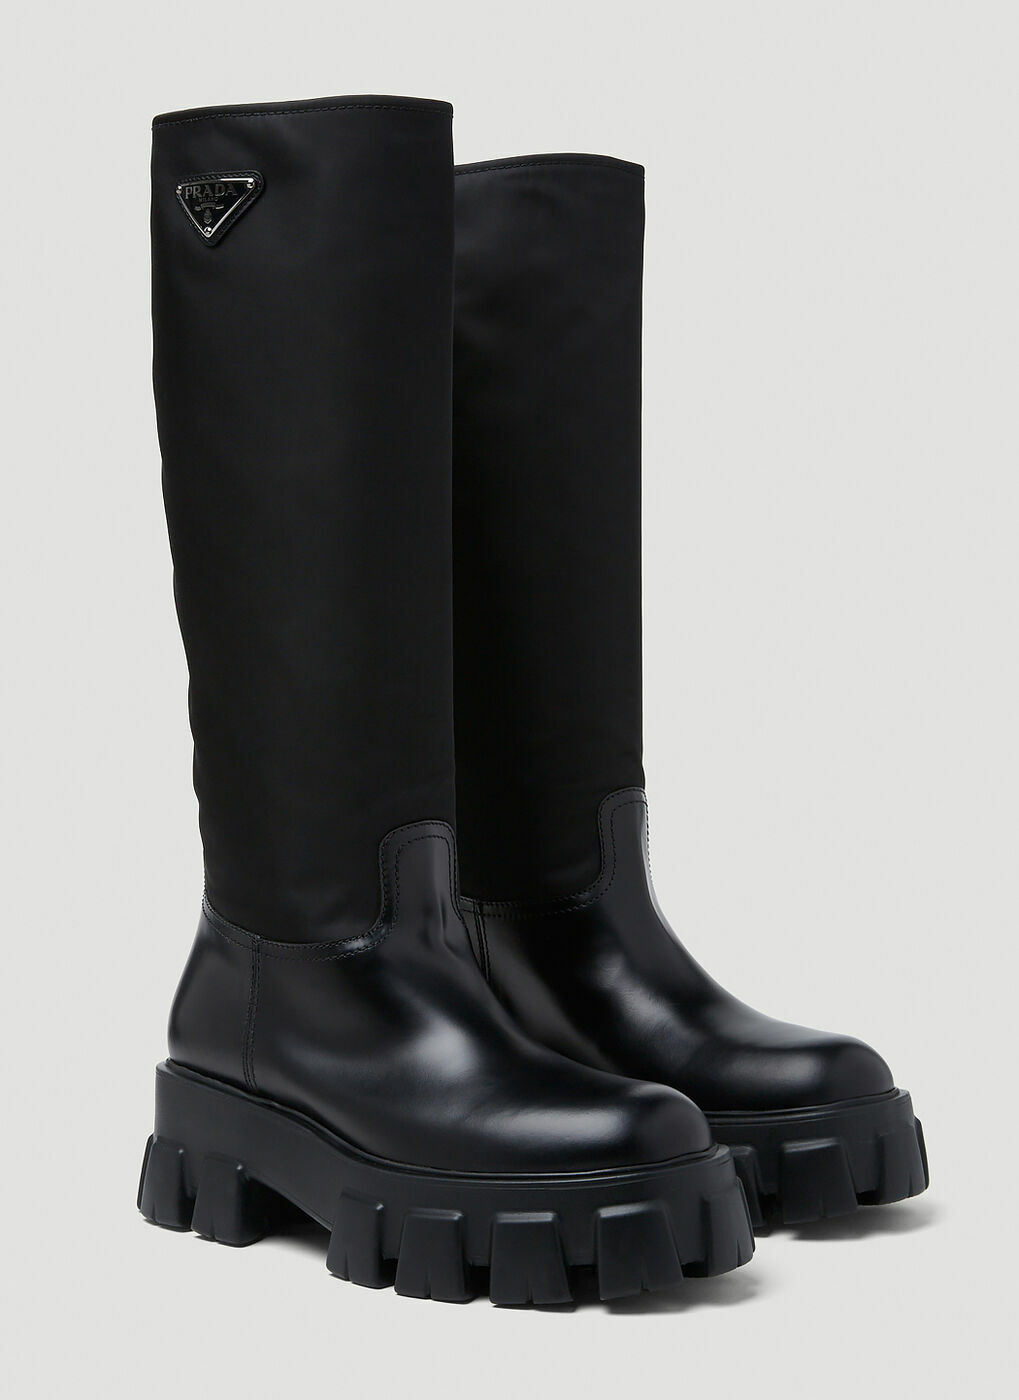 Leather and Re-Nylon Monolith Boots in Black Prada